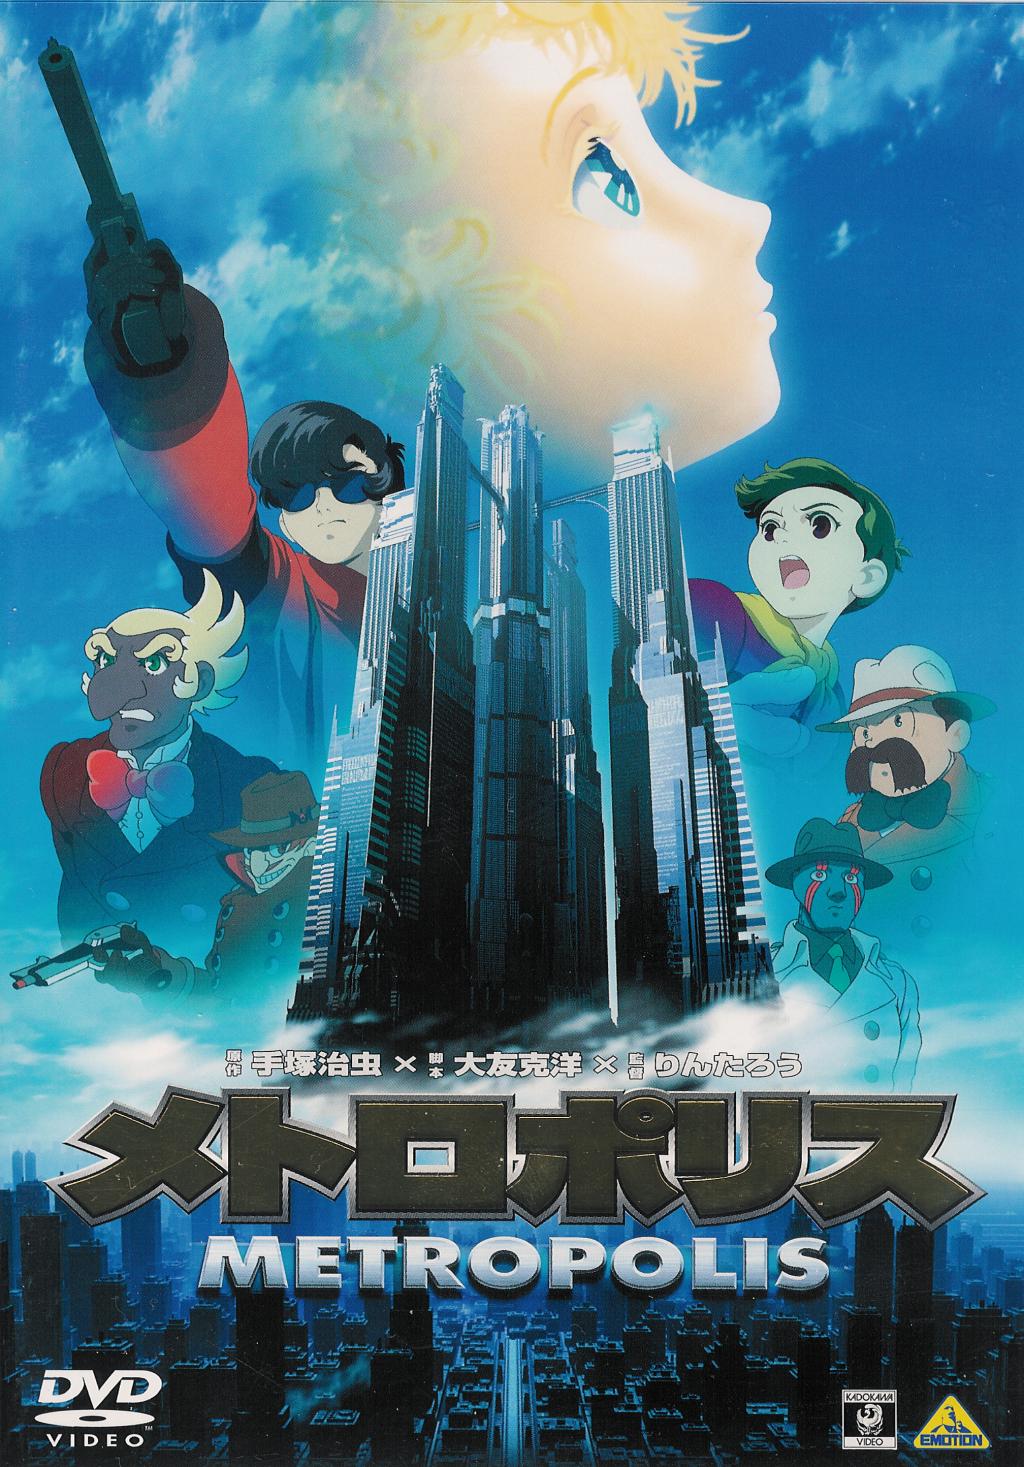 Anime review: Metropolis, a Japanese anime movie from 2001!